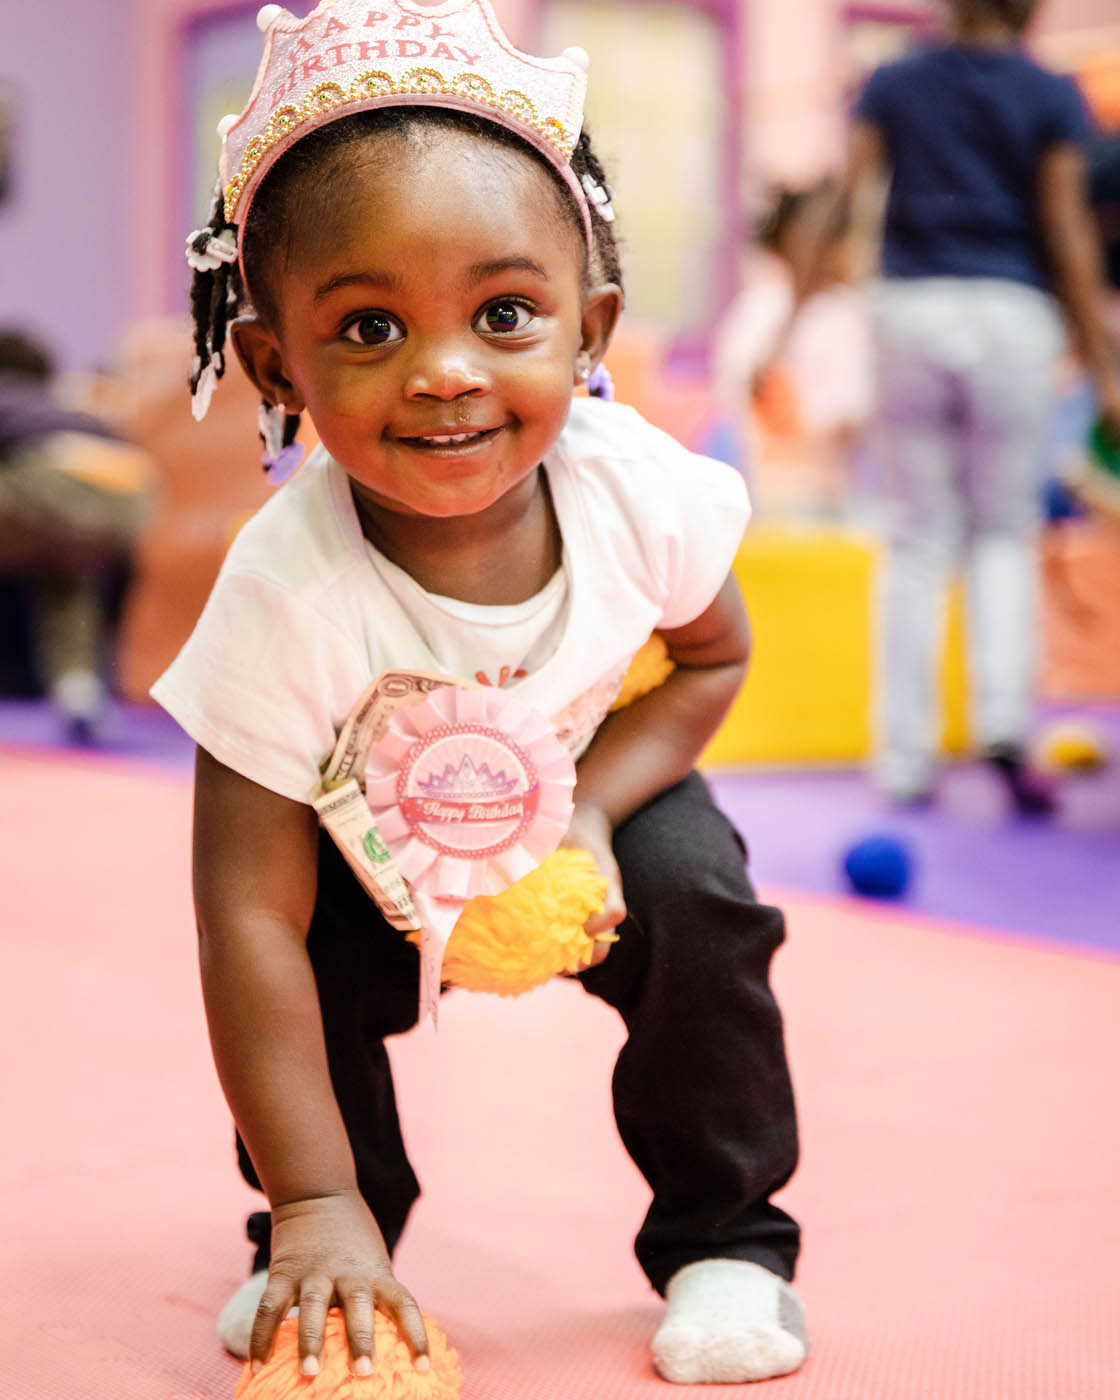 A toddler in a white shirt smiling at the camera, contact us today for toddler activities.